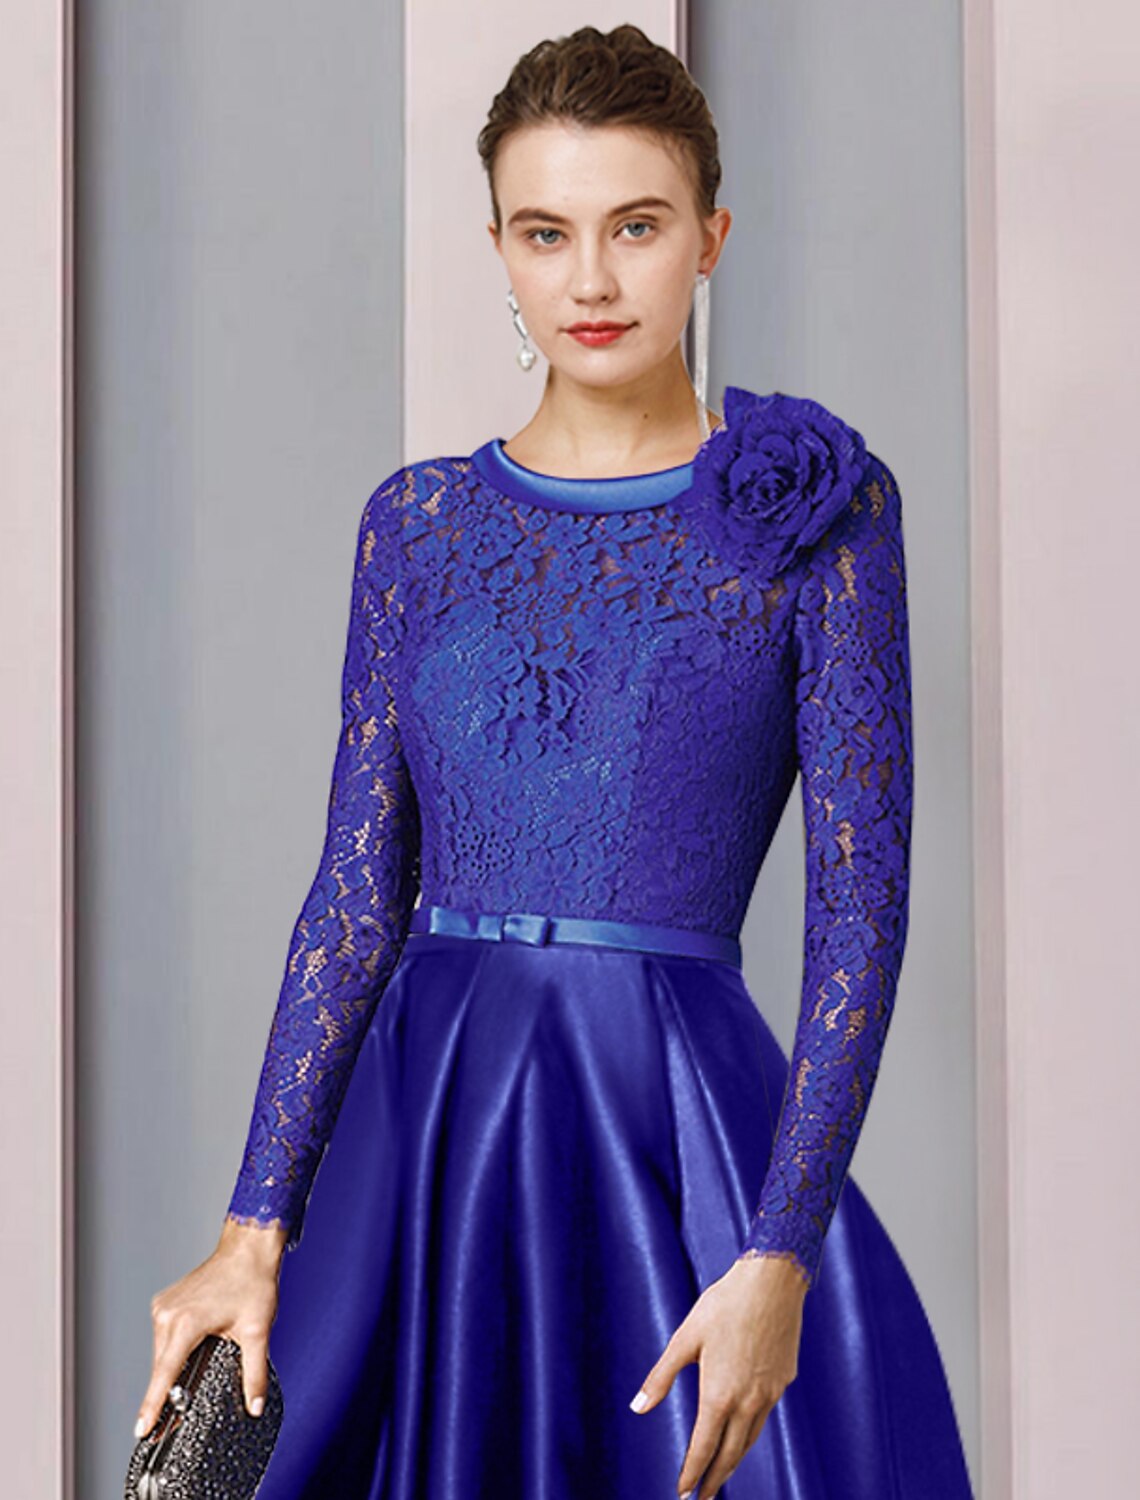 A-Line Mother of the Bride Dress Formal Church Elegant High Low Scoop Neck Satin Lace Long Sleeve with Bow Flower